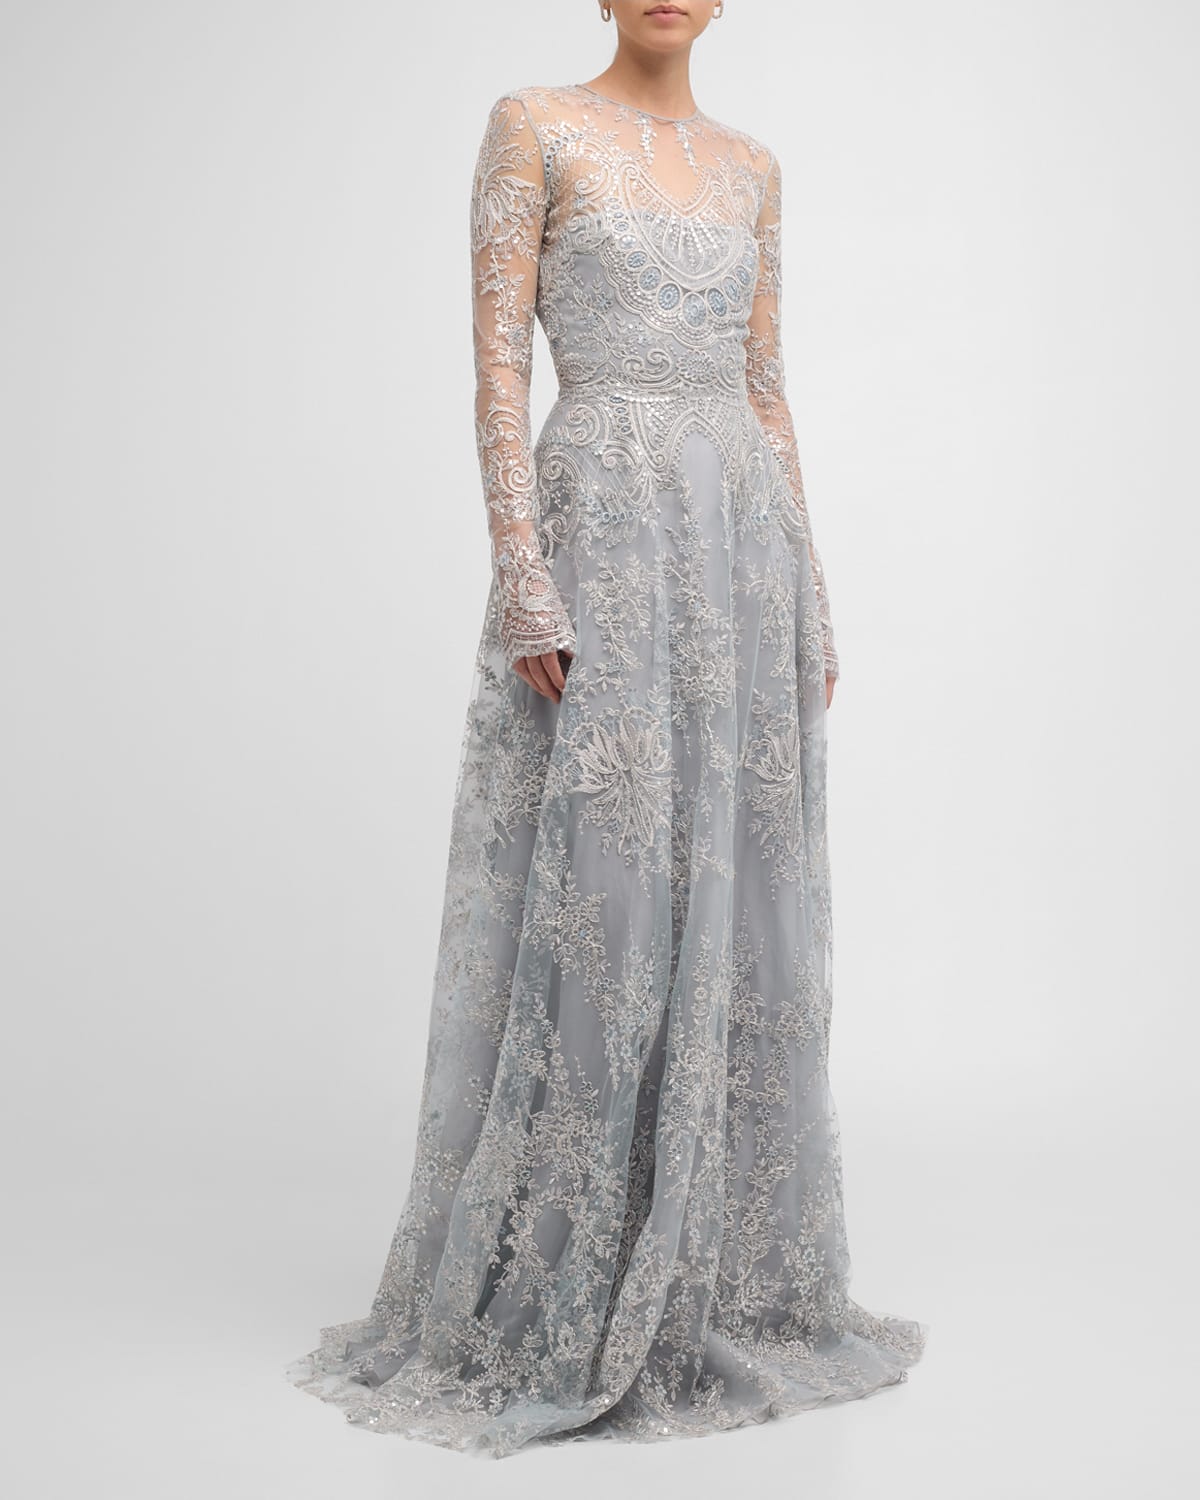 NAEEM KHAN TATTOO LACE GOWN WITH SHEER OVERLAY